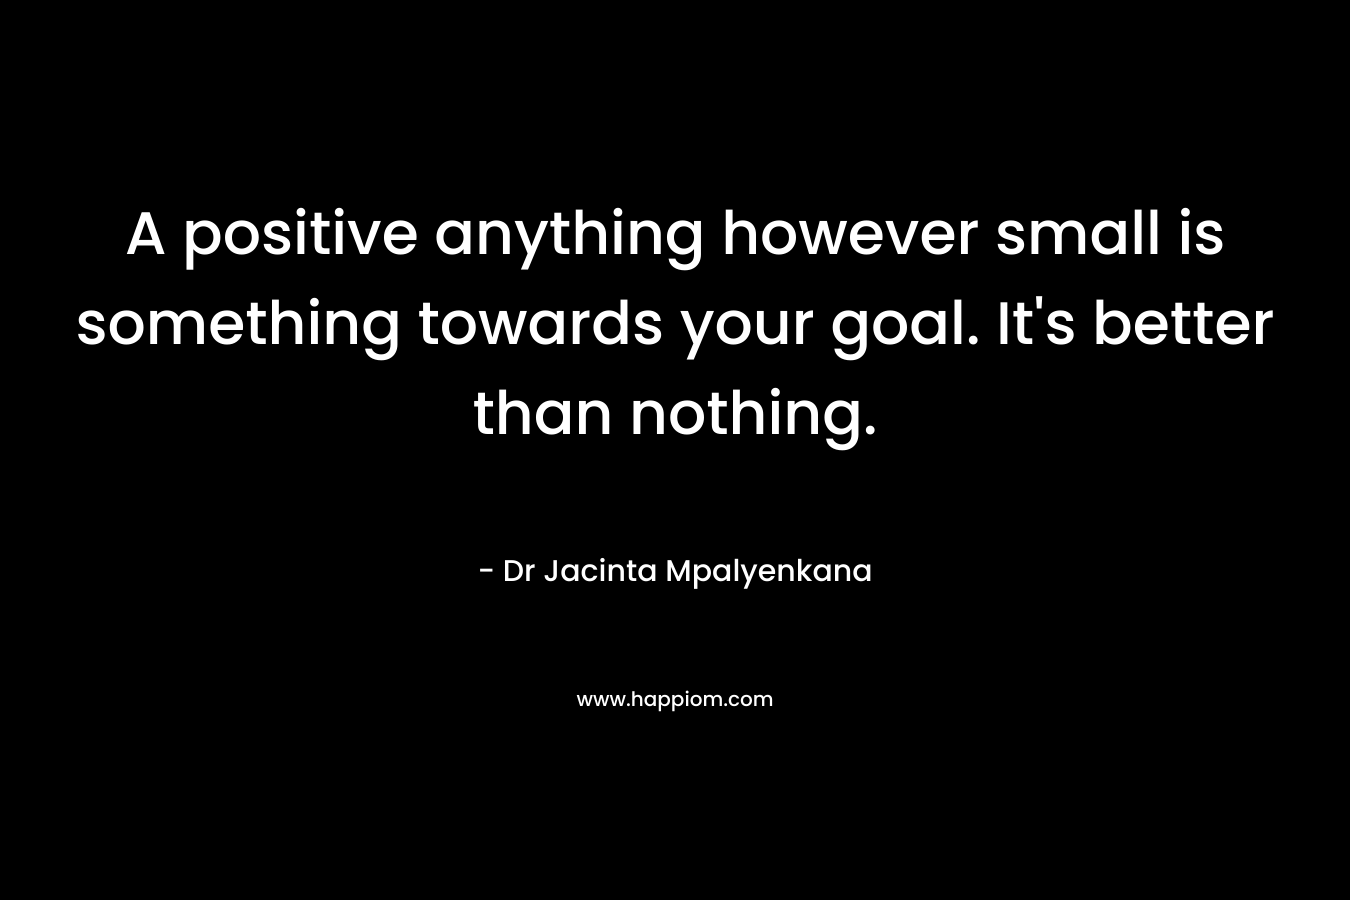 A positive anything however small is something towards your goal. It's better than nothing.